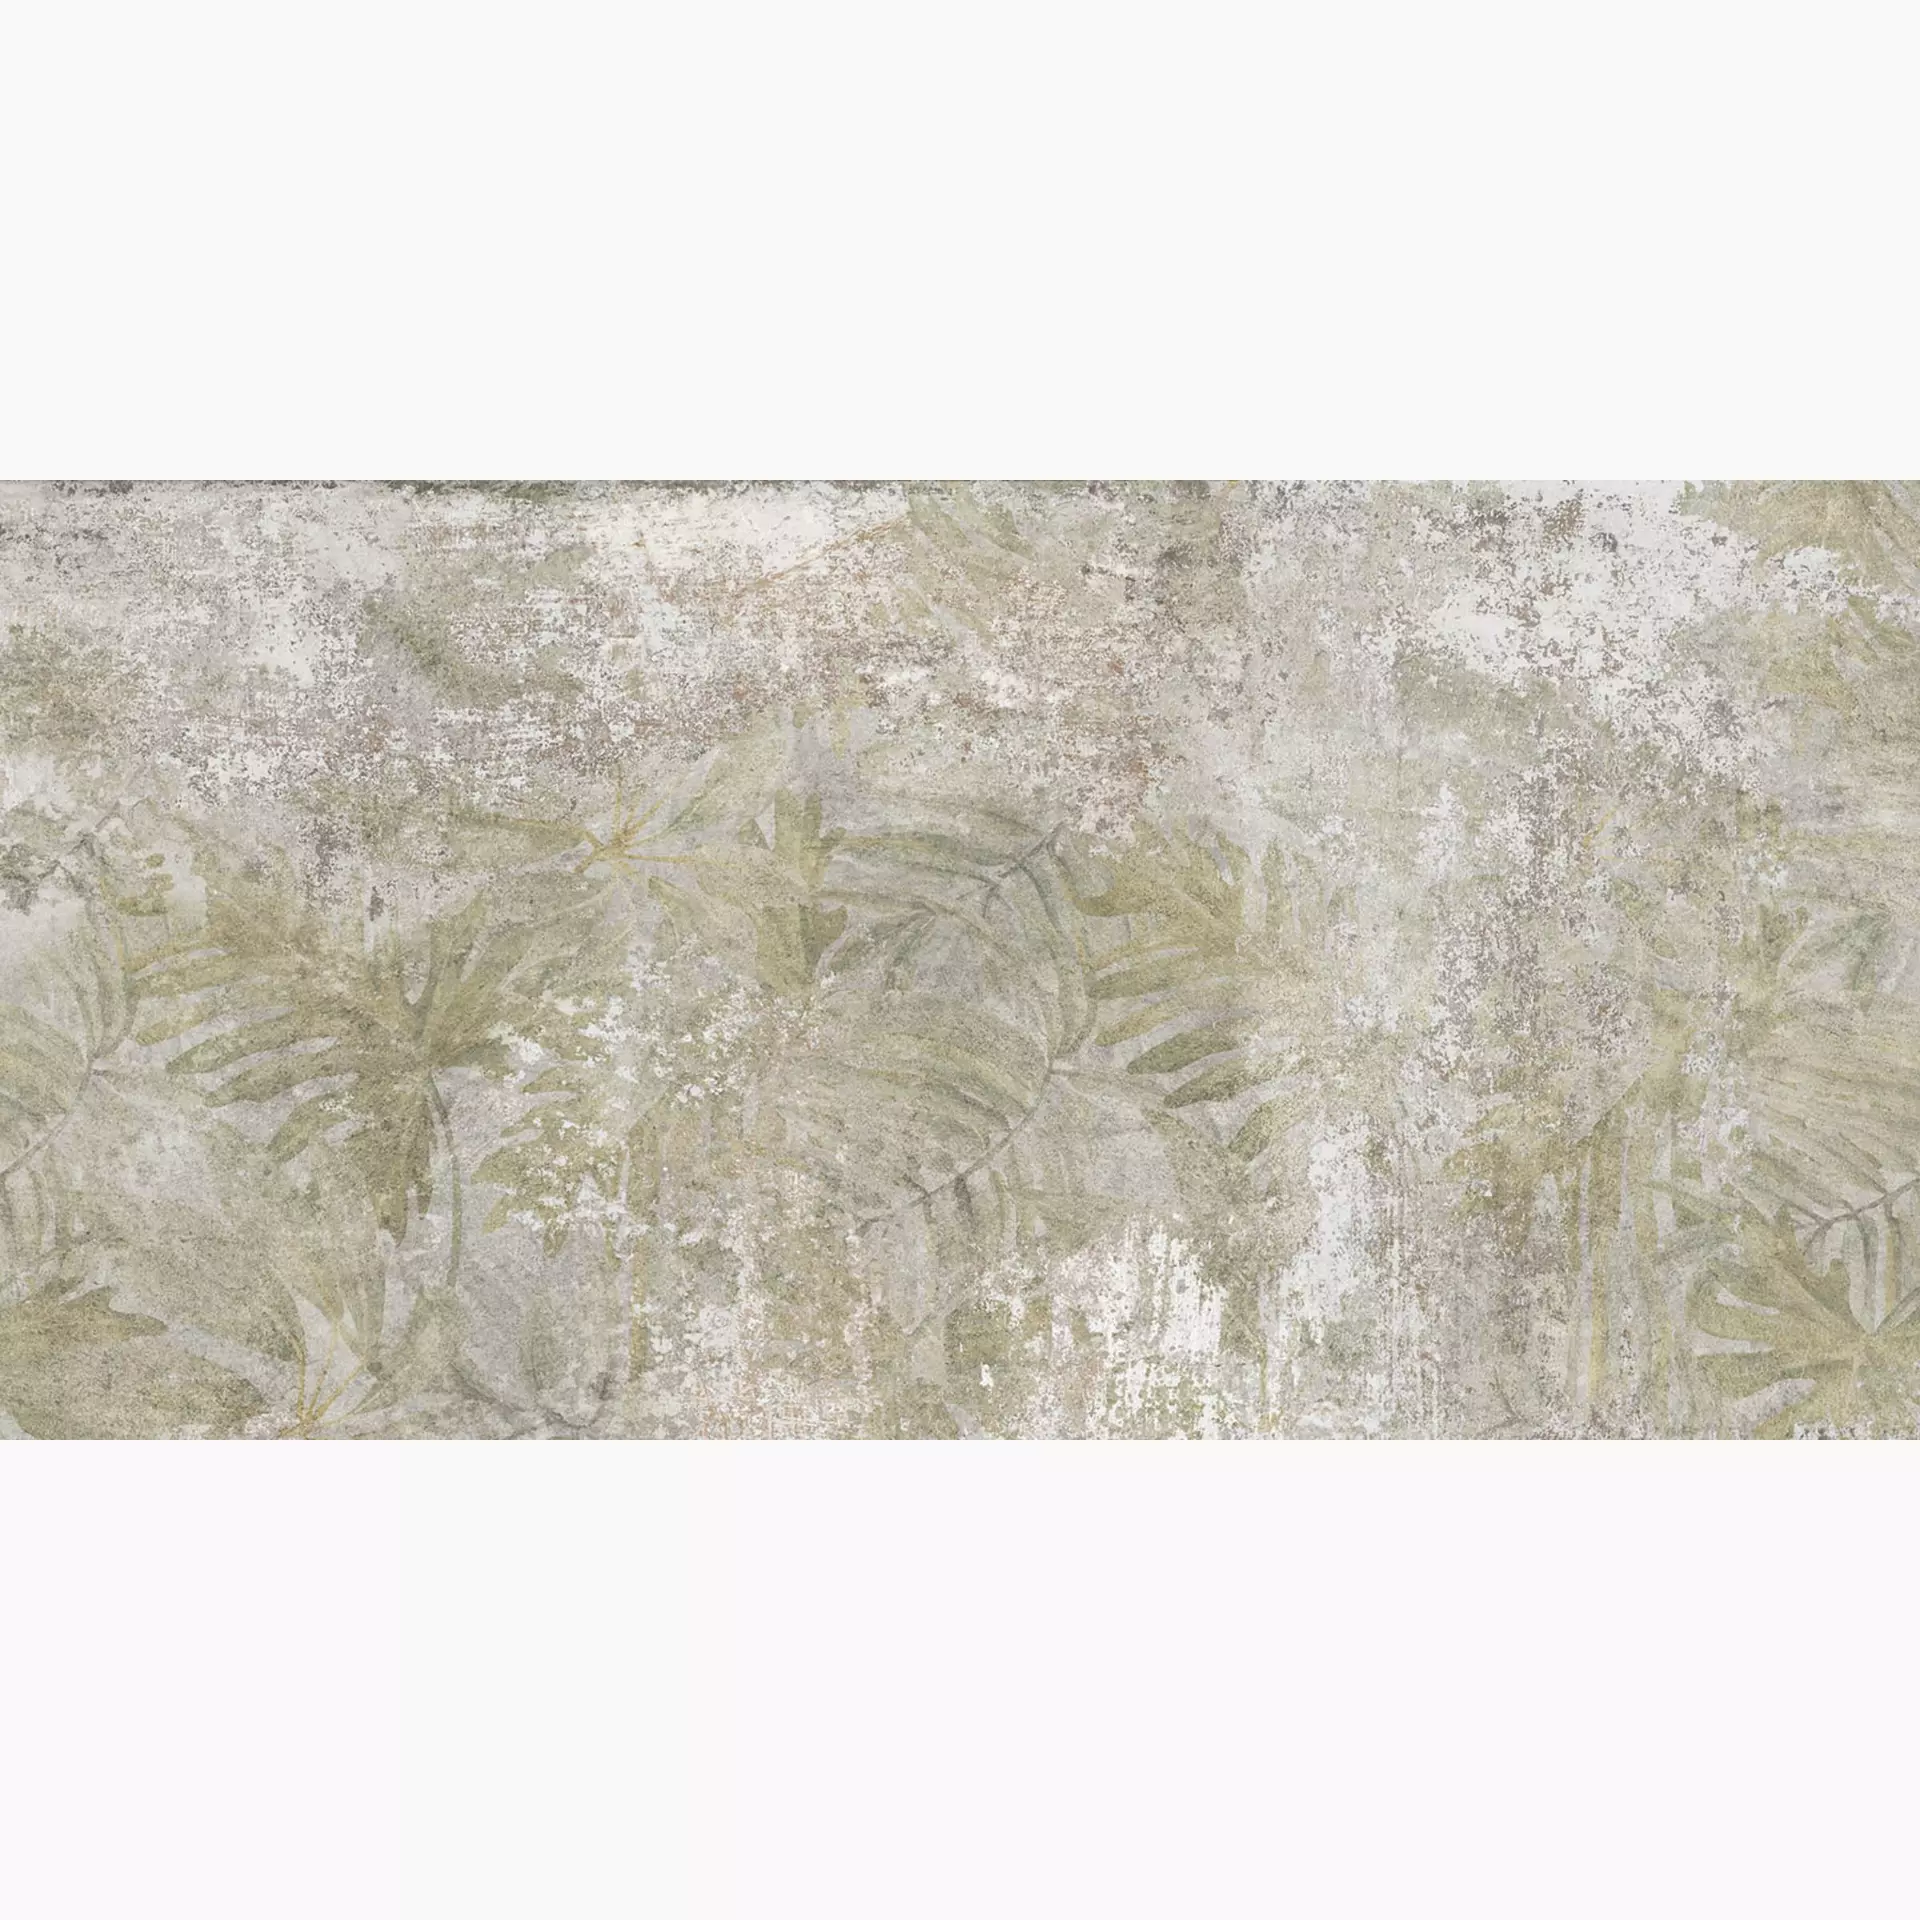 ABK Ghost Oasis Naturale Decor PF60004903 60x120cm rectified 8,5mm